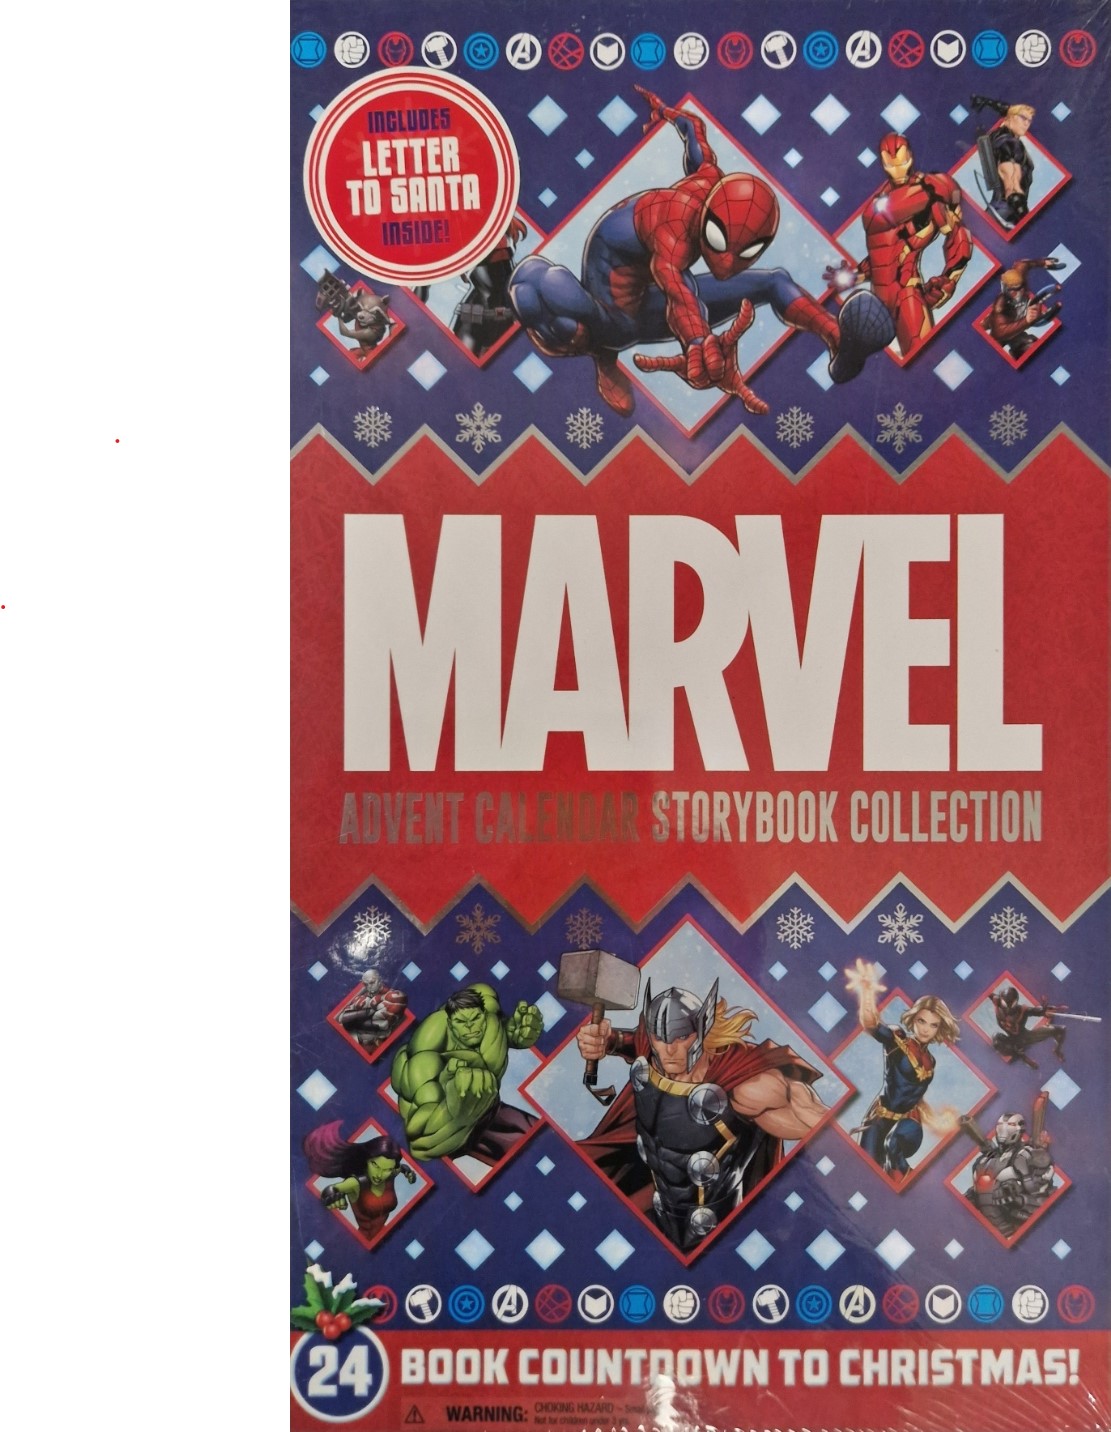 Marvel Advent Calendar Storybook Collection: Book Countdown to Christmas